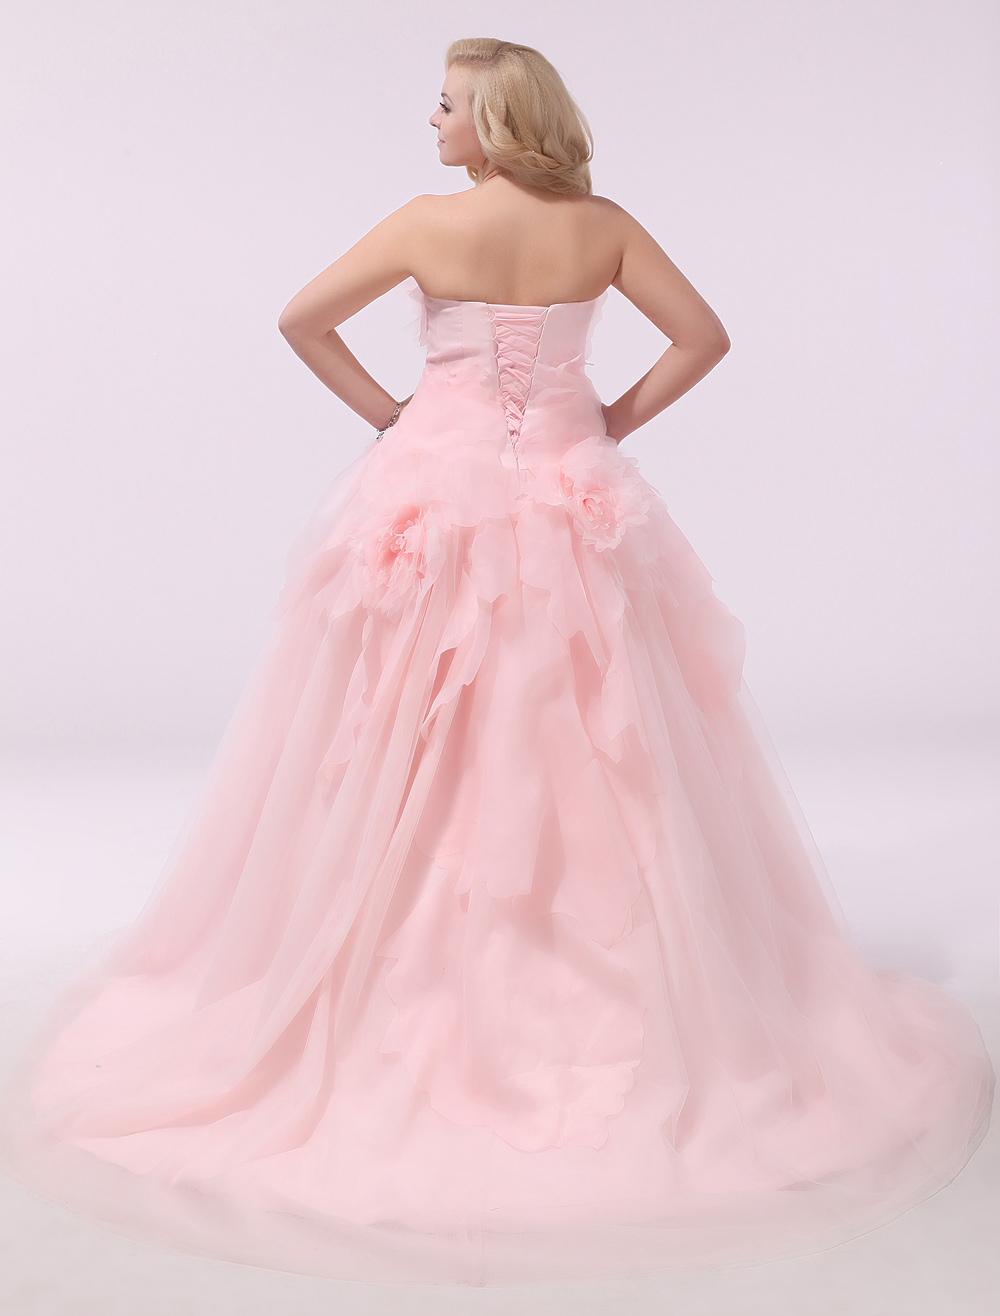 Plus Size Wedding Dress Pink Organza Bridal Gown Sweetheart Strapless A Line 3d Flowers Court